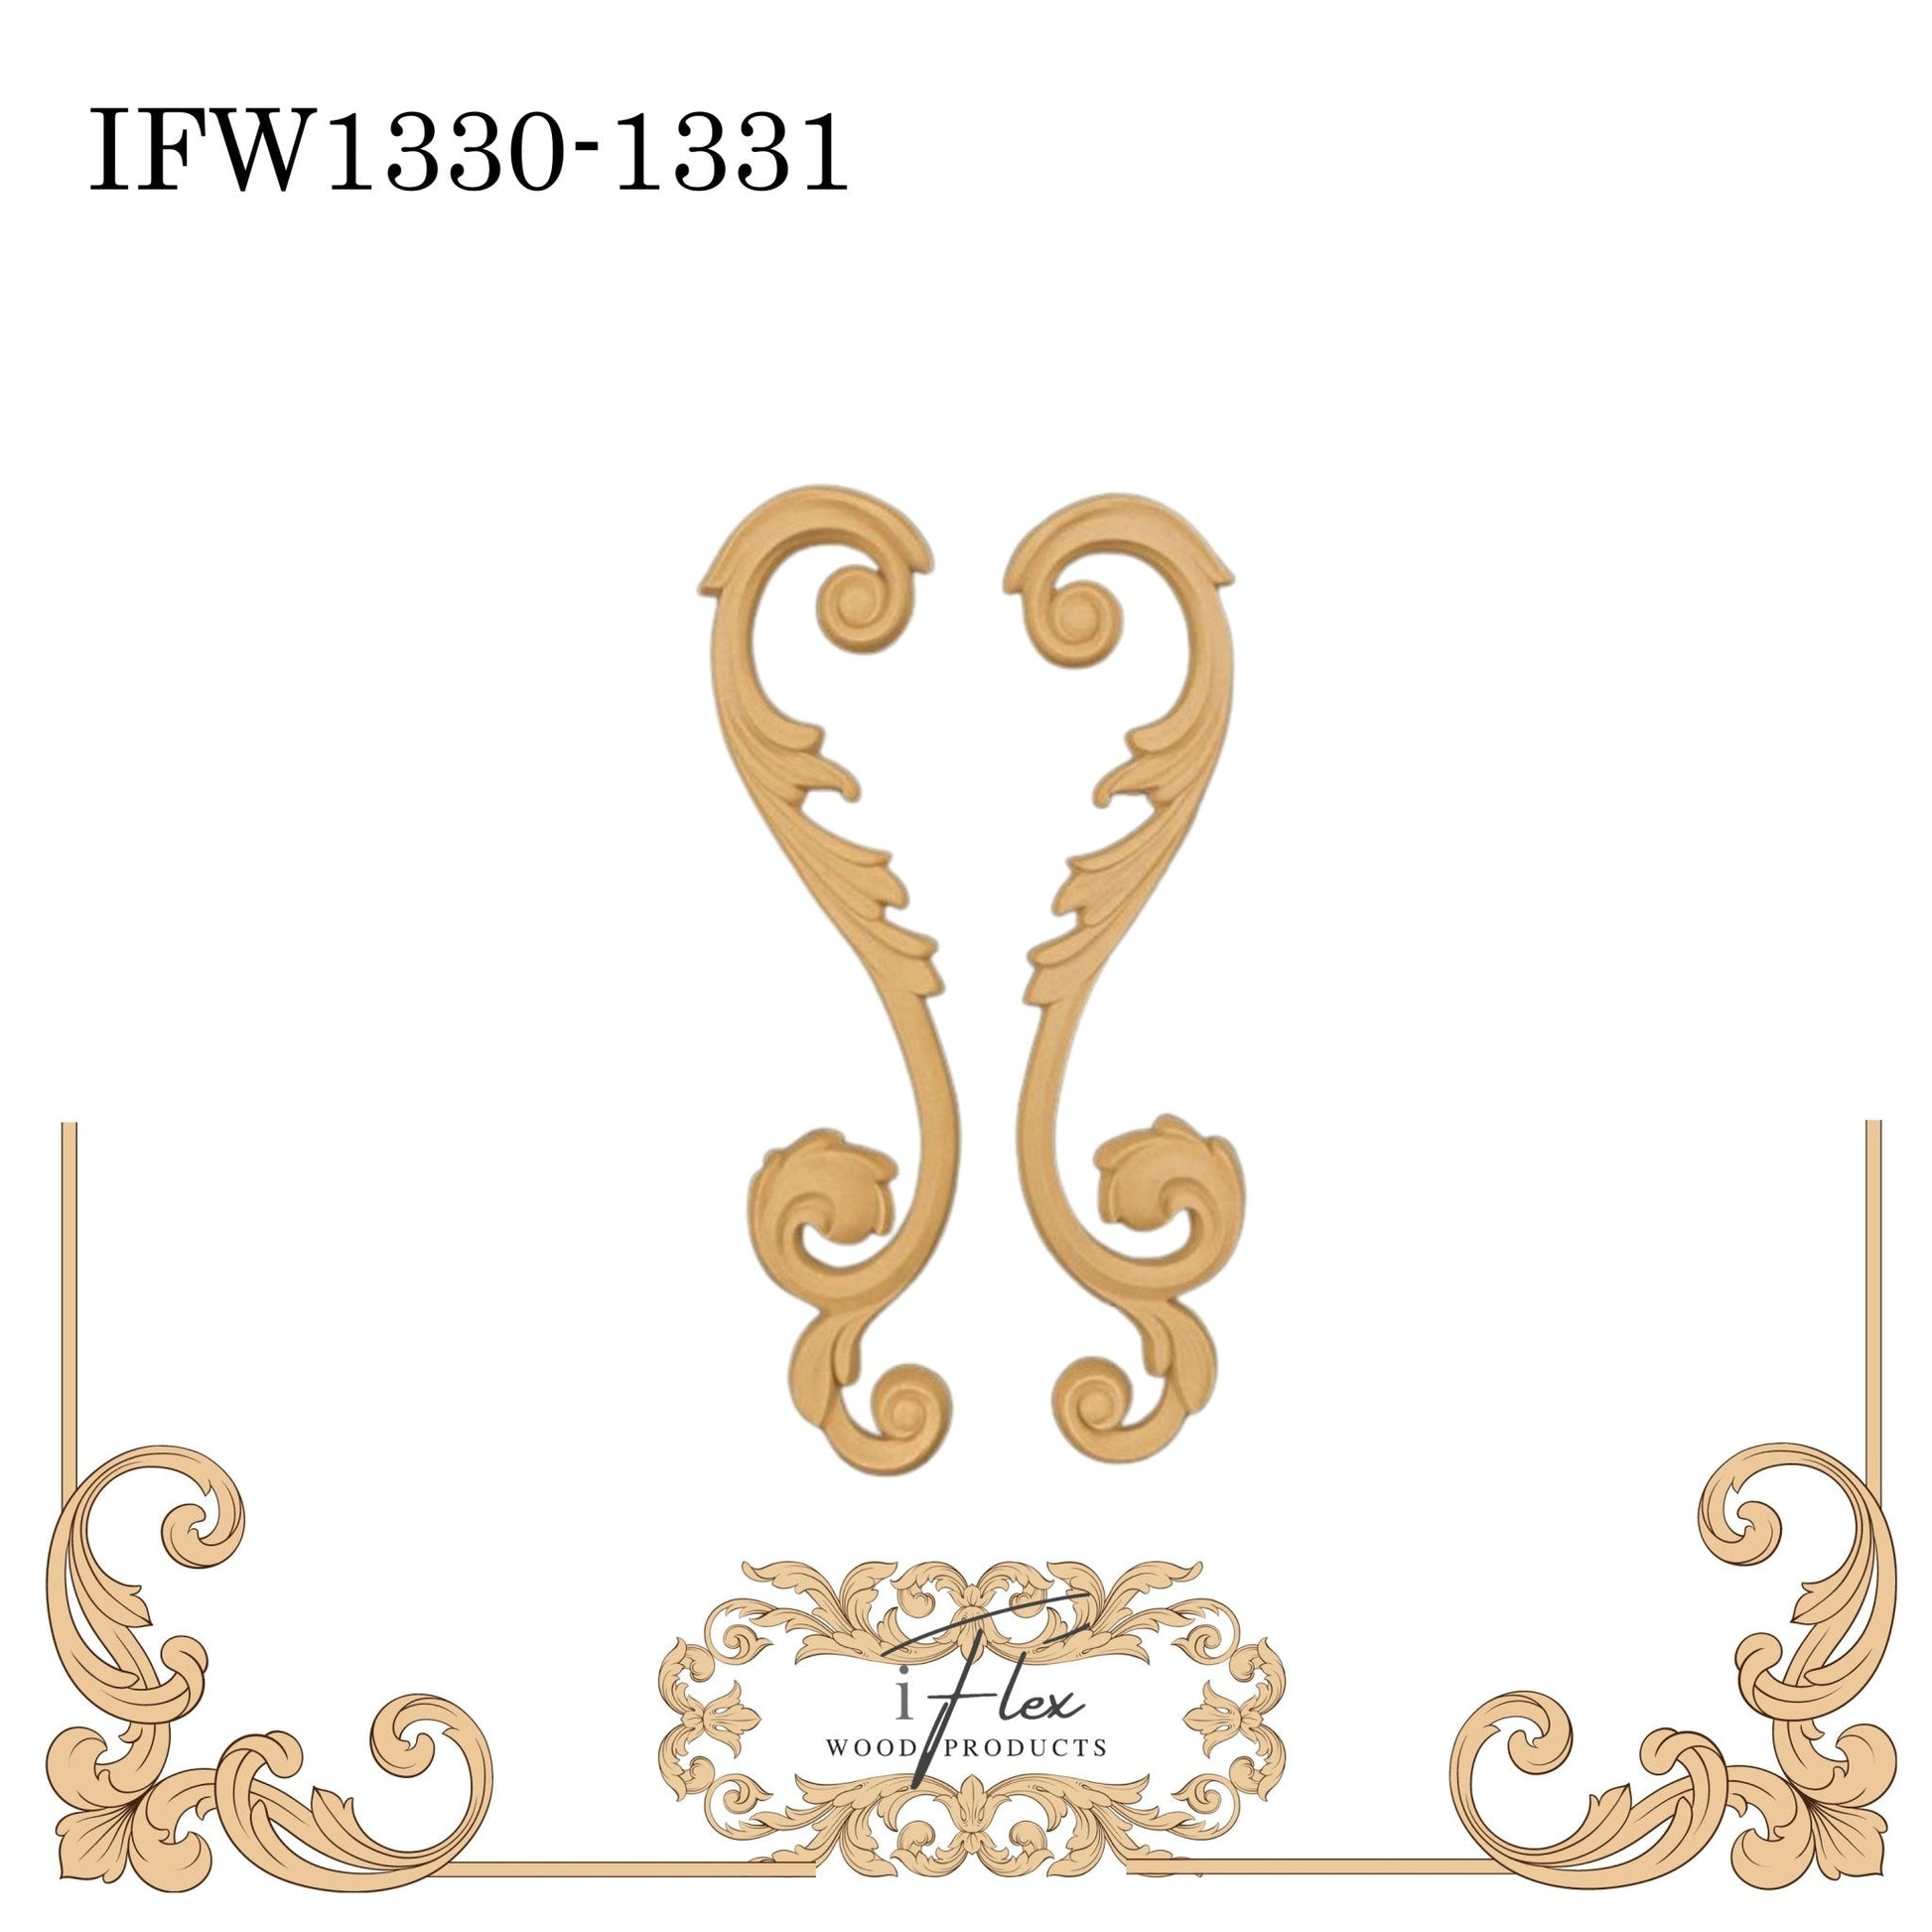 Large Scroll Applique IFW 1330-1331